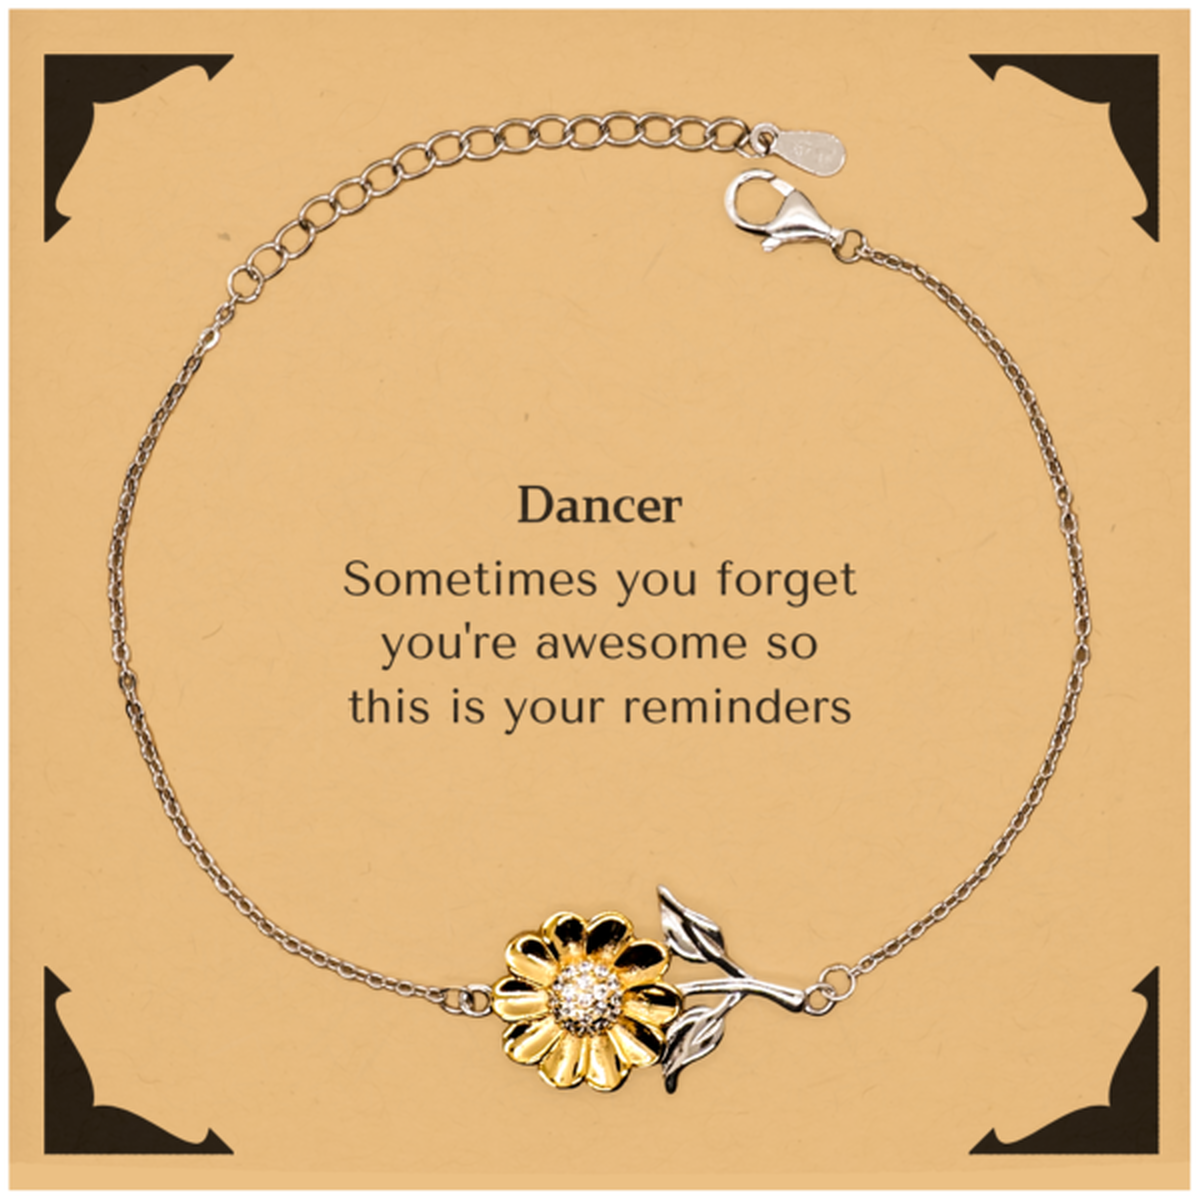 Sentimental Dancer Sunflower Bracelet, Dancer Sometimes you forget you're awesome so this is your reminders, Graduation Christmas Birthday Gifts for Dancer, Men, Women, Coworkers